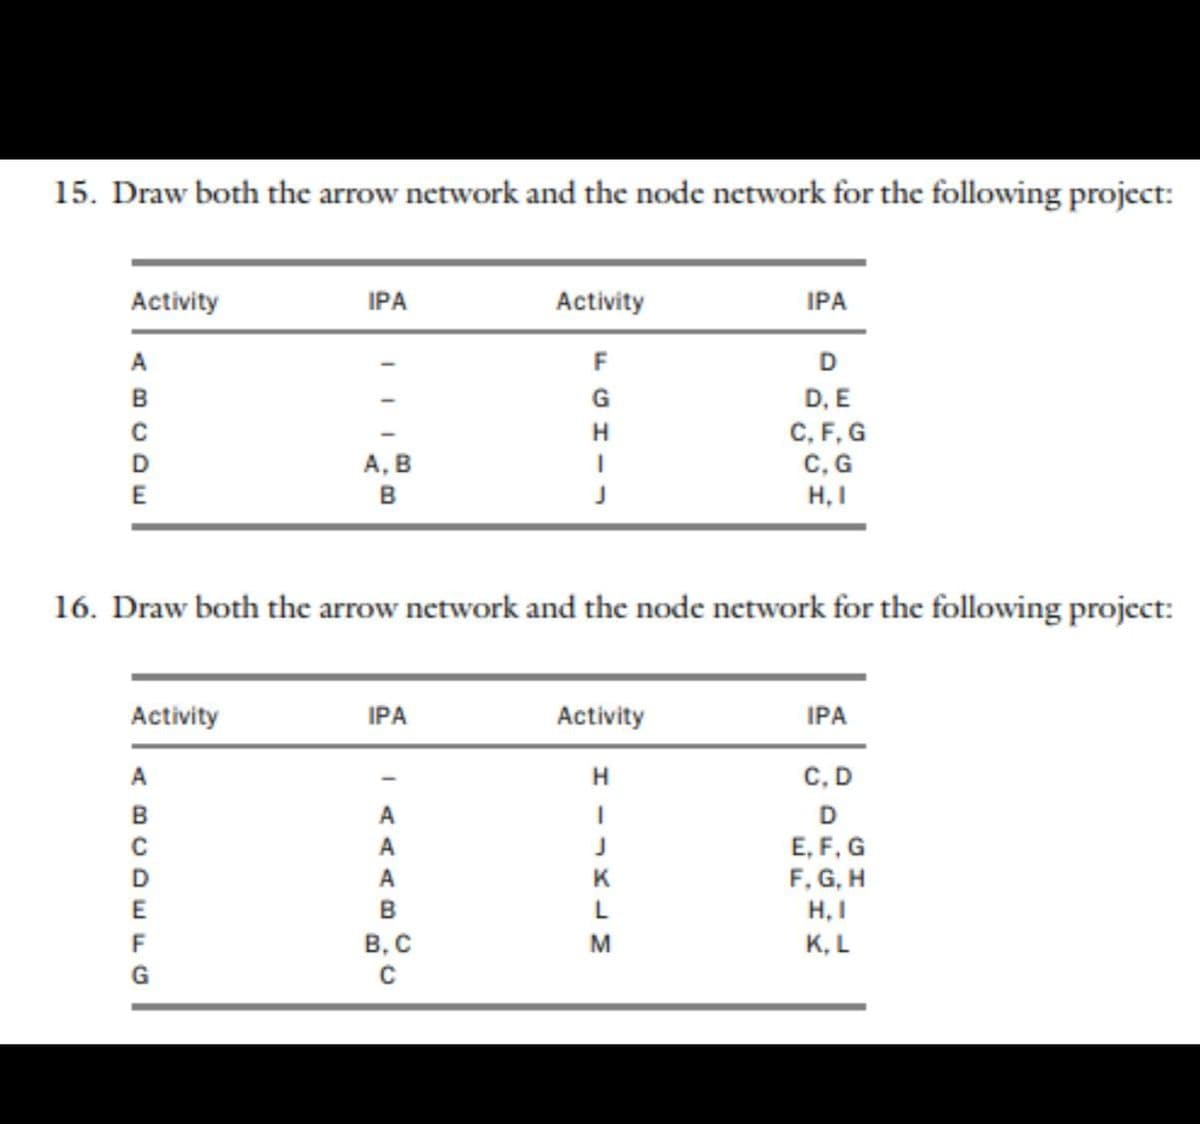 15. Draw both the arrow network and the node network for the following project:
Activity
IPA
Activity
IPA
A
F
D
D, E
C, F, G
C, G
H,I
B
G
C
H
D
A, B
E
в
16. Draw both the arrow network and the node network for the following project:
Activity
IPA
Activity
IPA
A
C, D
B
A
D
E, F, G
F, G, H
H, I
К, L
A
D
A
B
F
В, С
M
G
